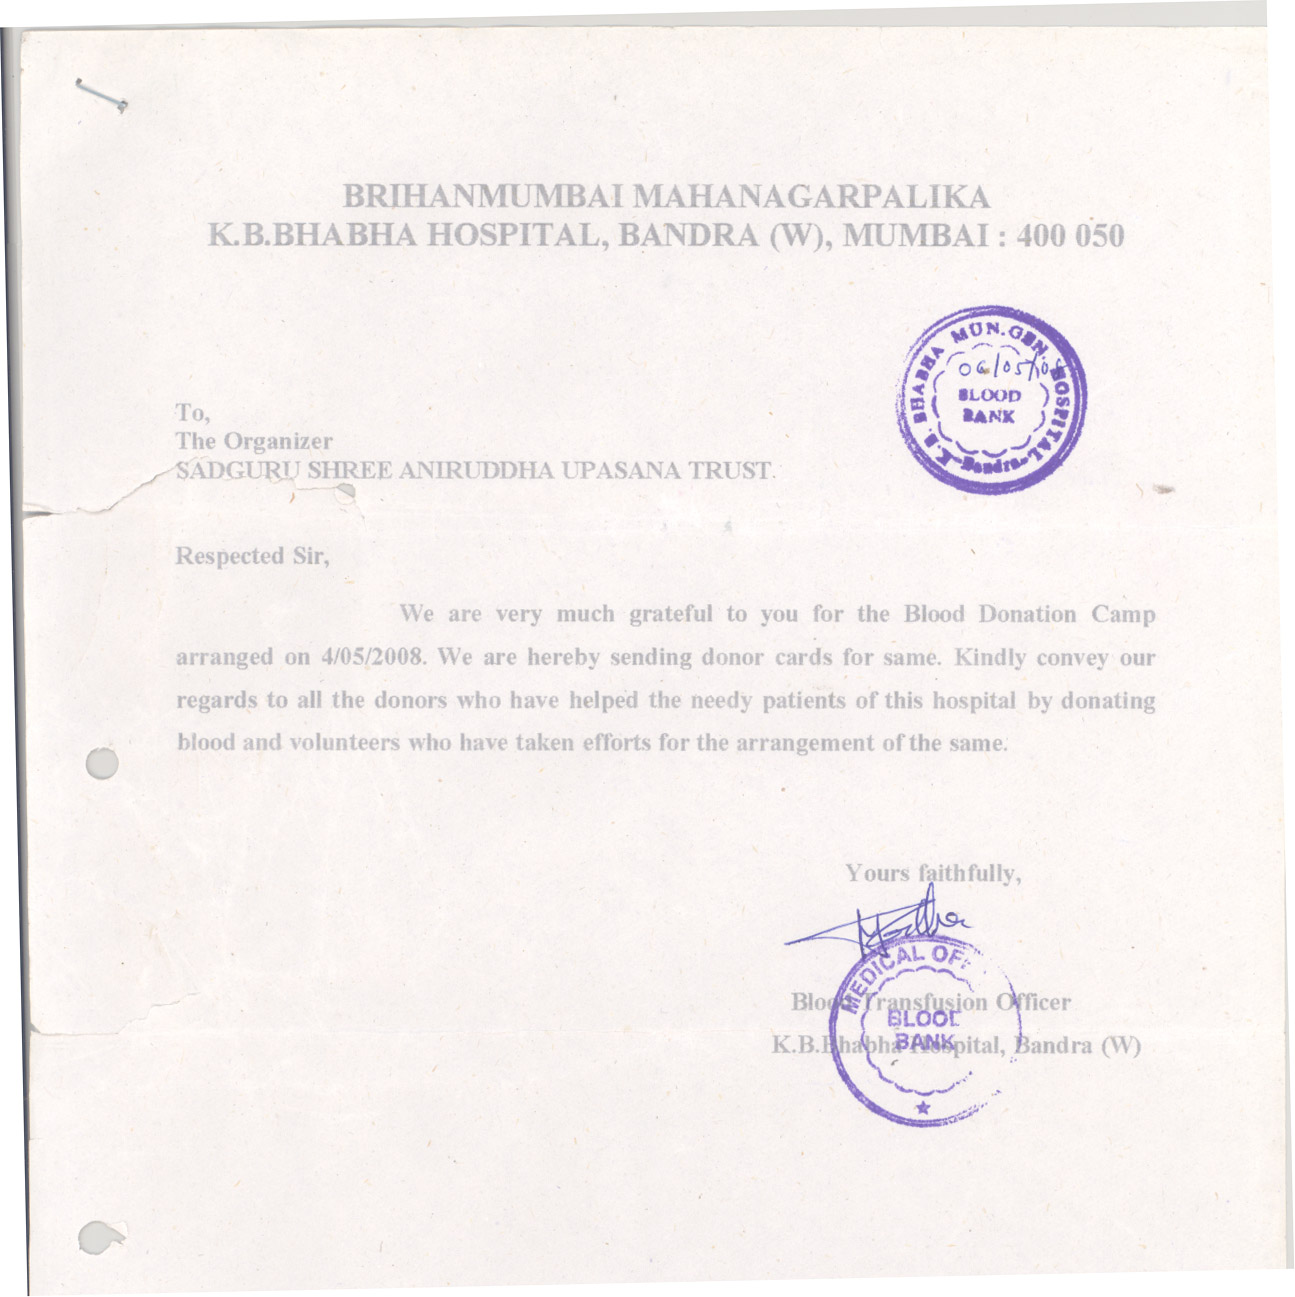 Appreciation-Letter from Babha Hospital 2008 -for-Aniruddhafoundation-Compassion-Social-services